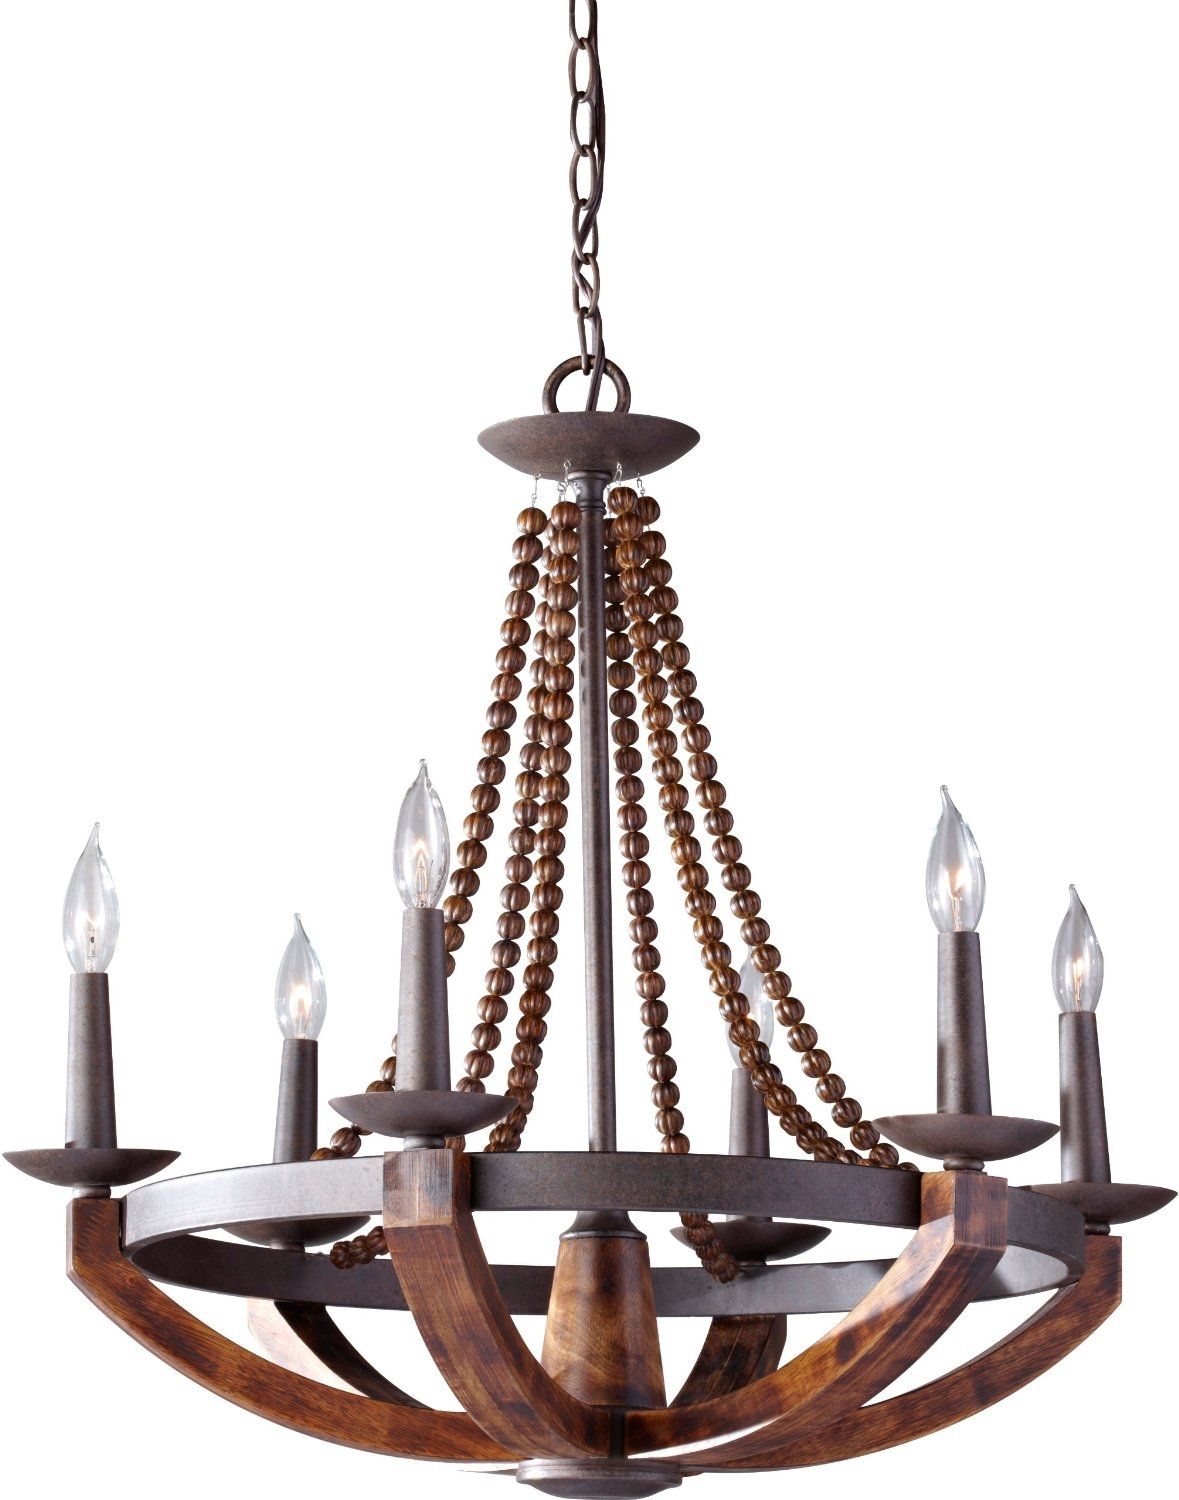 12 Best Rustic Wood And Metal Chandeliers Qosy Intended For Modern Wrought Iron Chandeliers (View 8 of 12)